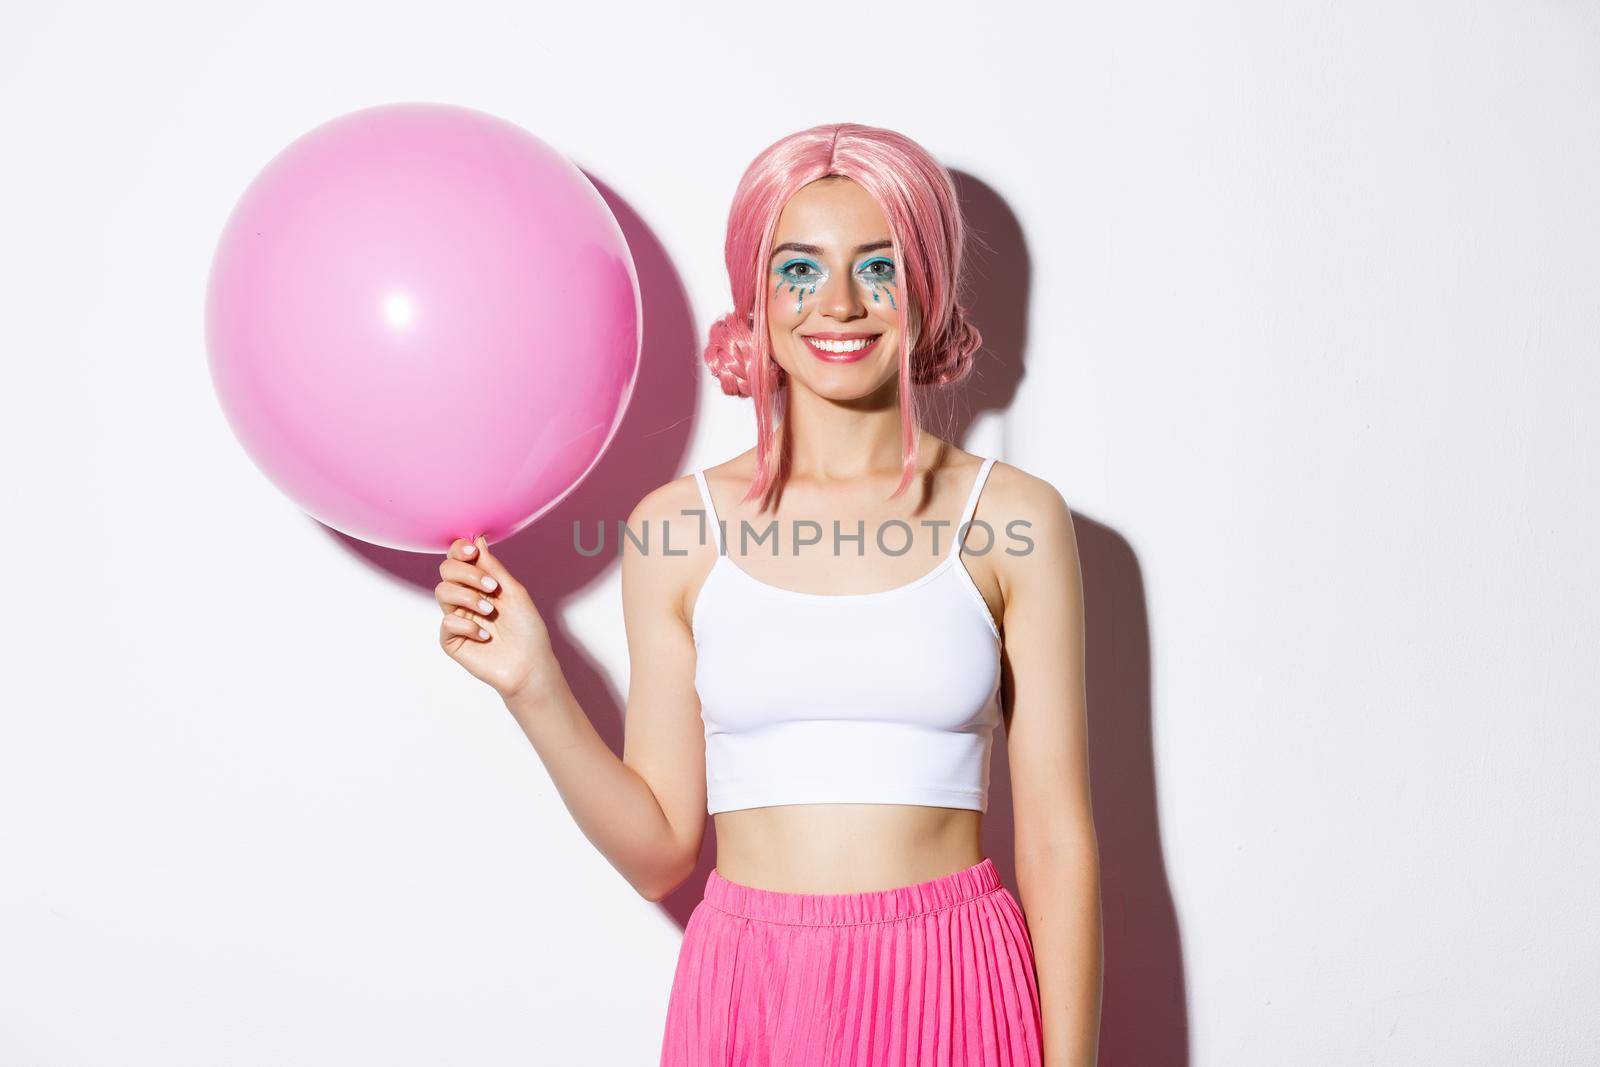 Pretty smiling girl wearing pink wig and holding balloon at holiday celebration or a party, standing happy over white background.